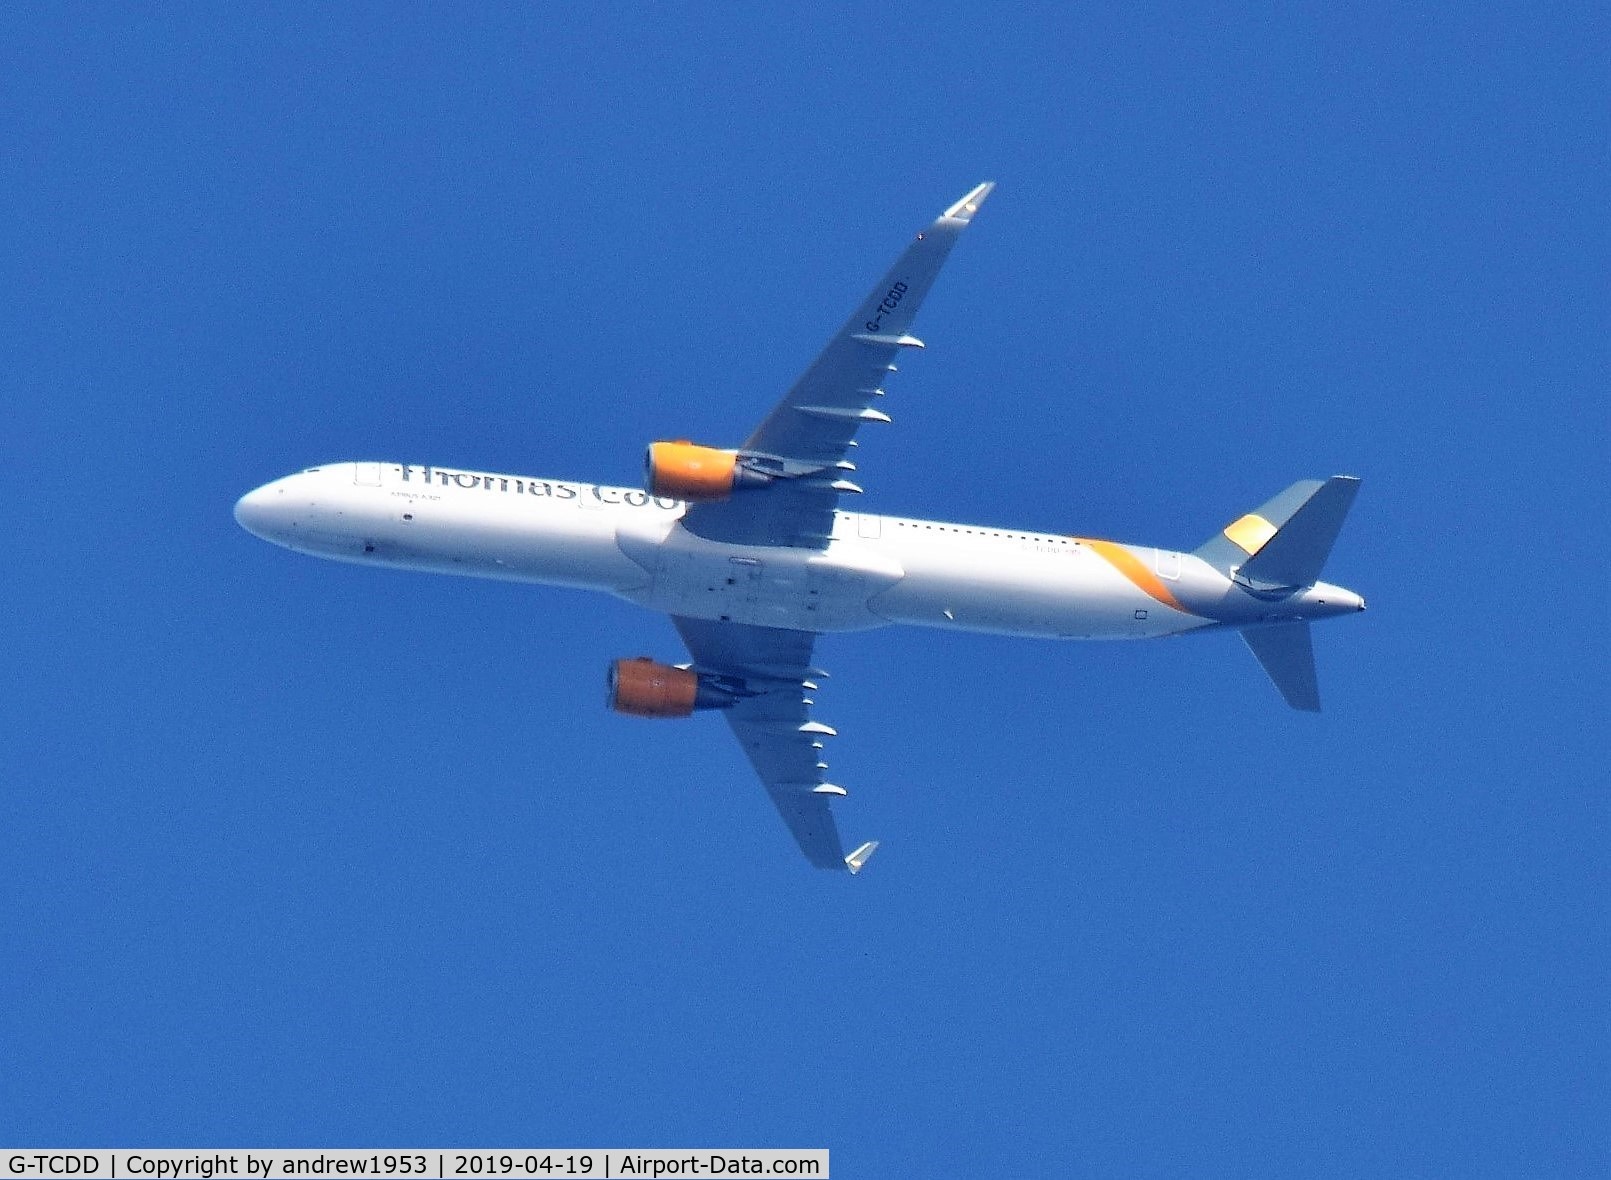 G-TCDD, 2014 Airbus A321-211 C/N 6038, G-TCDD over the Bristol Channel.